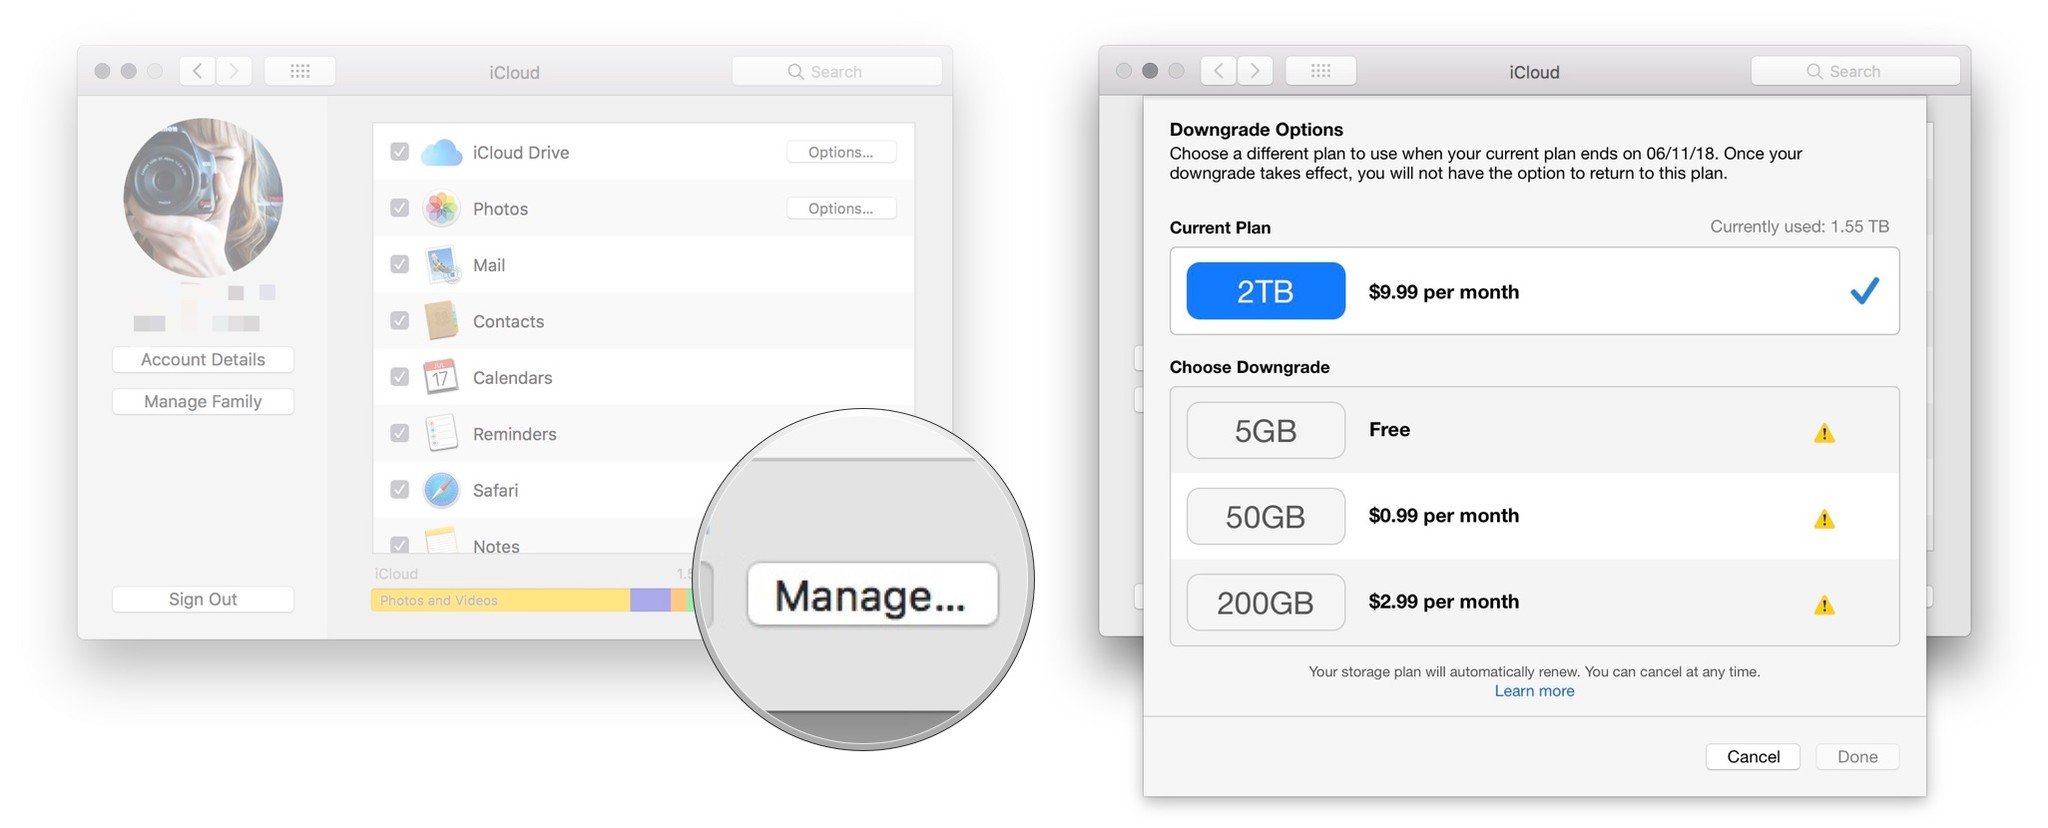 How to downgrade storage plans on Mac by showing steps: Click Manage, click Change Storage Plan, choose a new plan